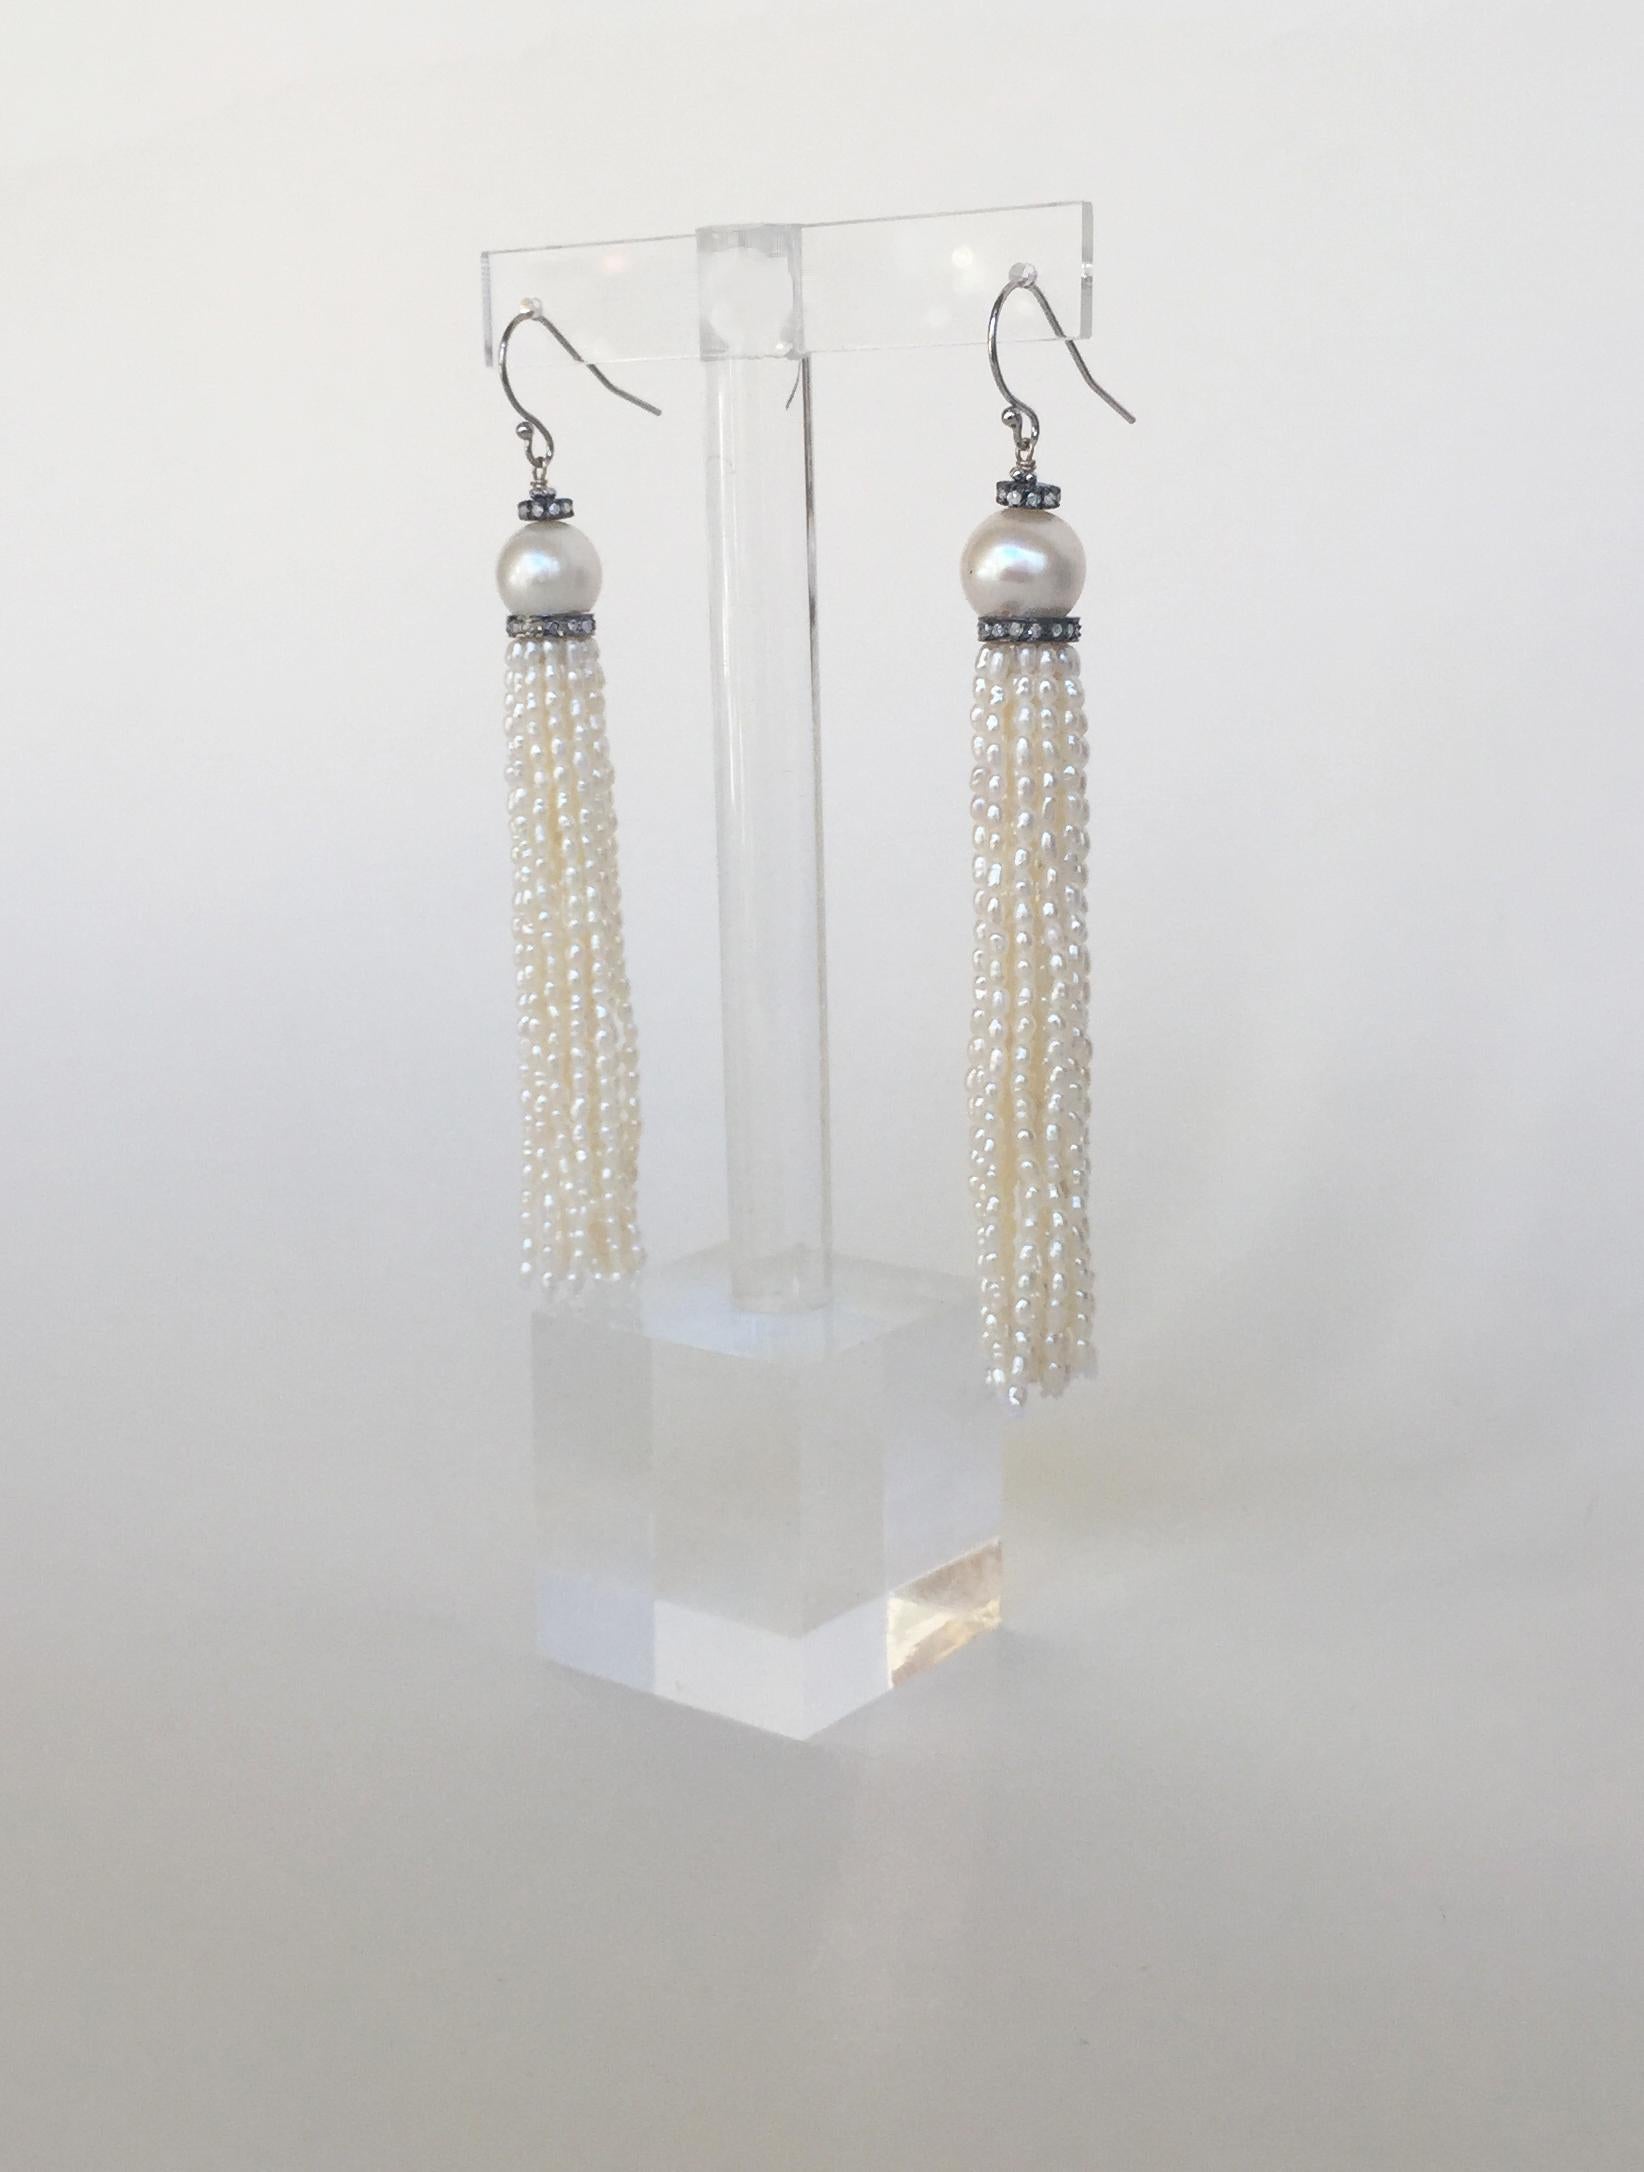 These white rice tassel earrings with diamond encrusted silver roundel and 14k white gold hooks are handmade by Marina J. These elegant tassel earrings are made with glowing white rice pearl strands. A round white pearl sits between two diamond